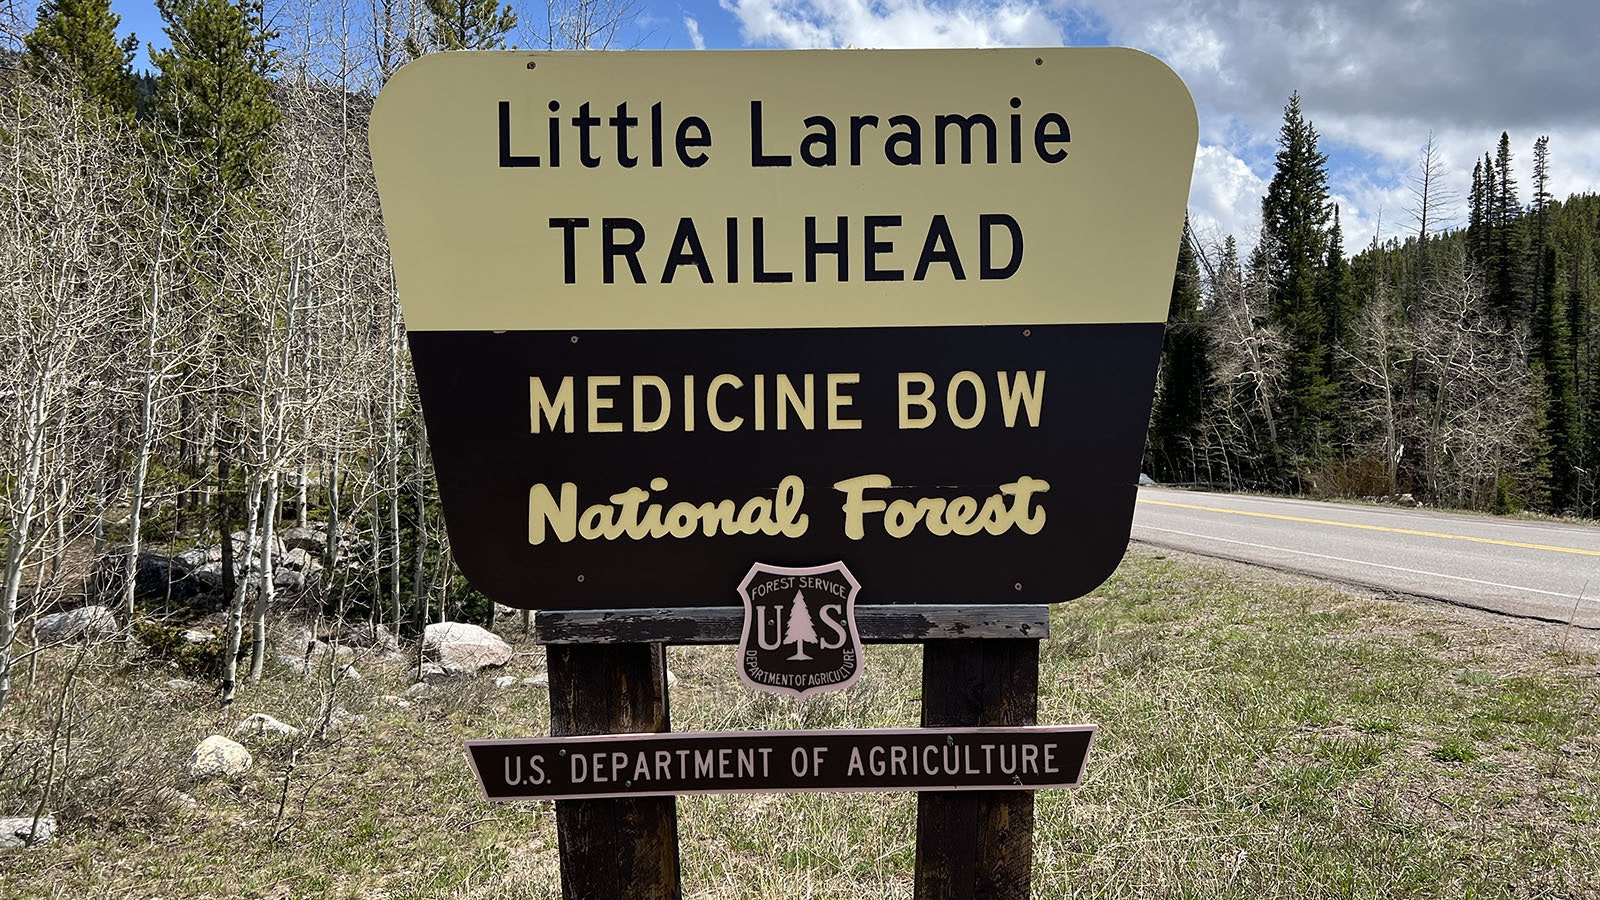 The Little Laramie Trailhead in the Snowy Range Mountains near Laramie is a popular spot for hikers, but there is downed timber – blown over by recent windstorms – throughout the area.